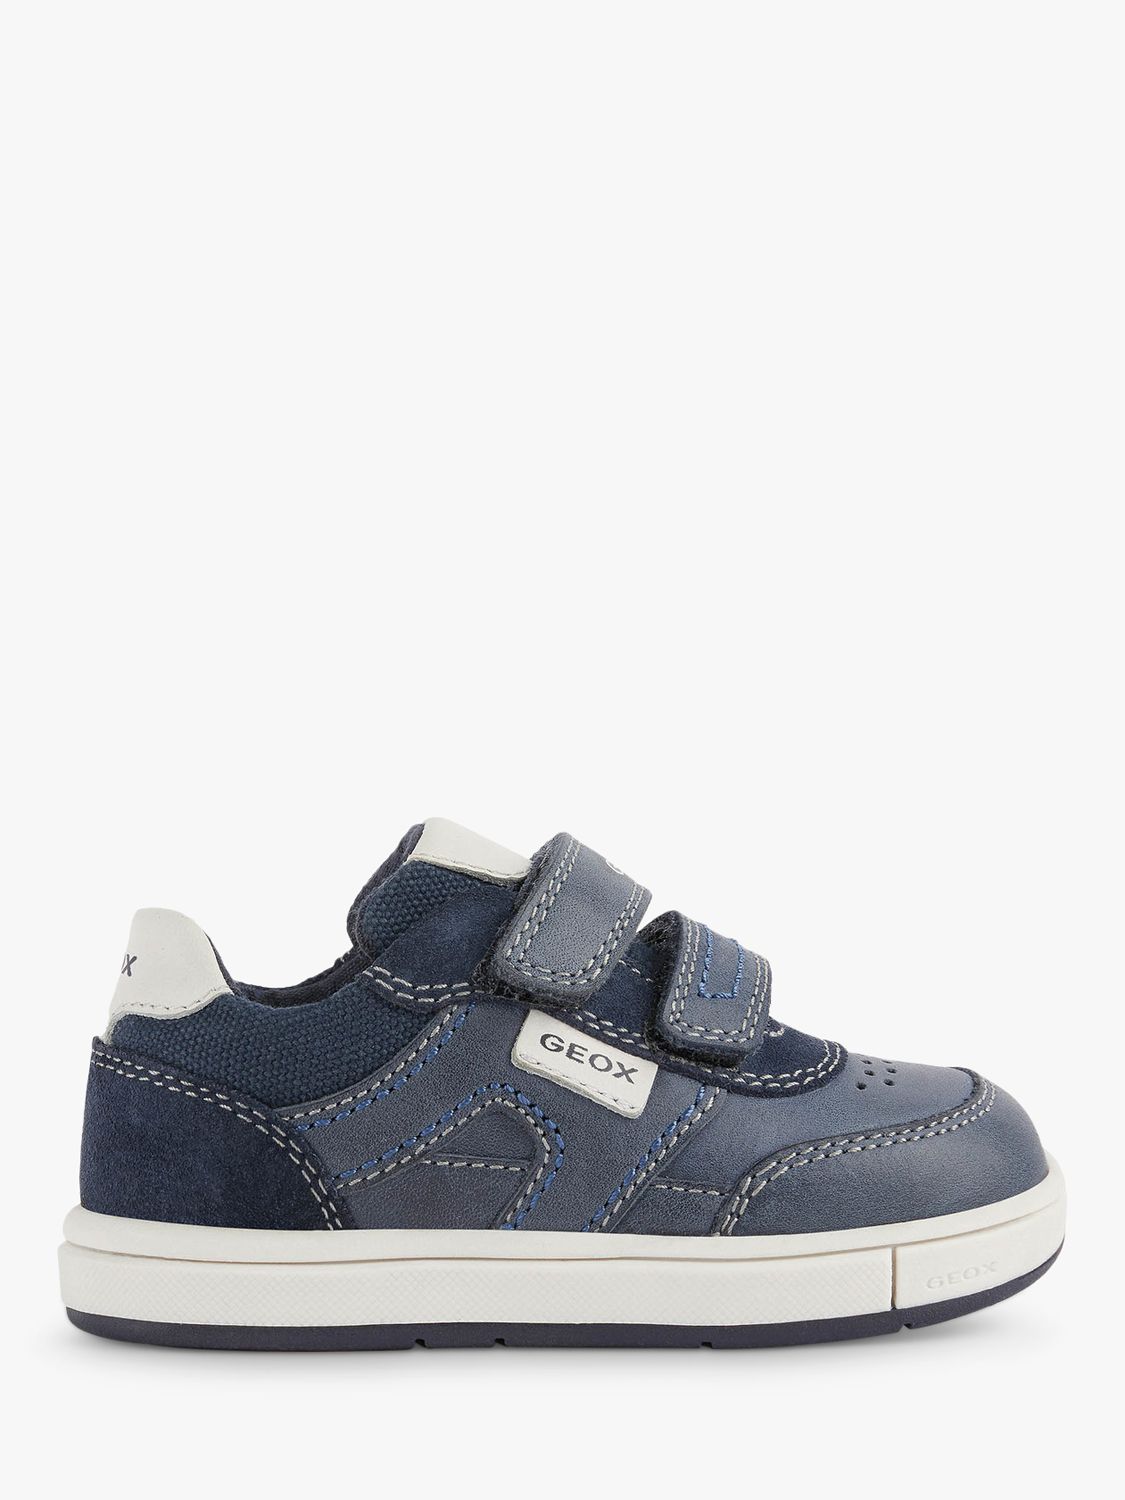 Geox Kids' Trottola Leather Trainers, Navy/White, 21